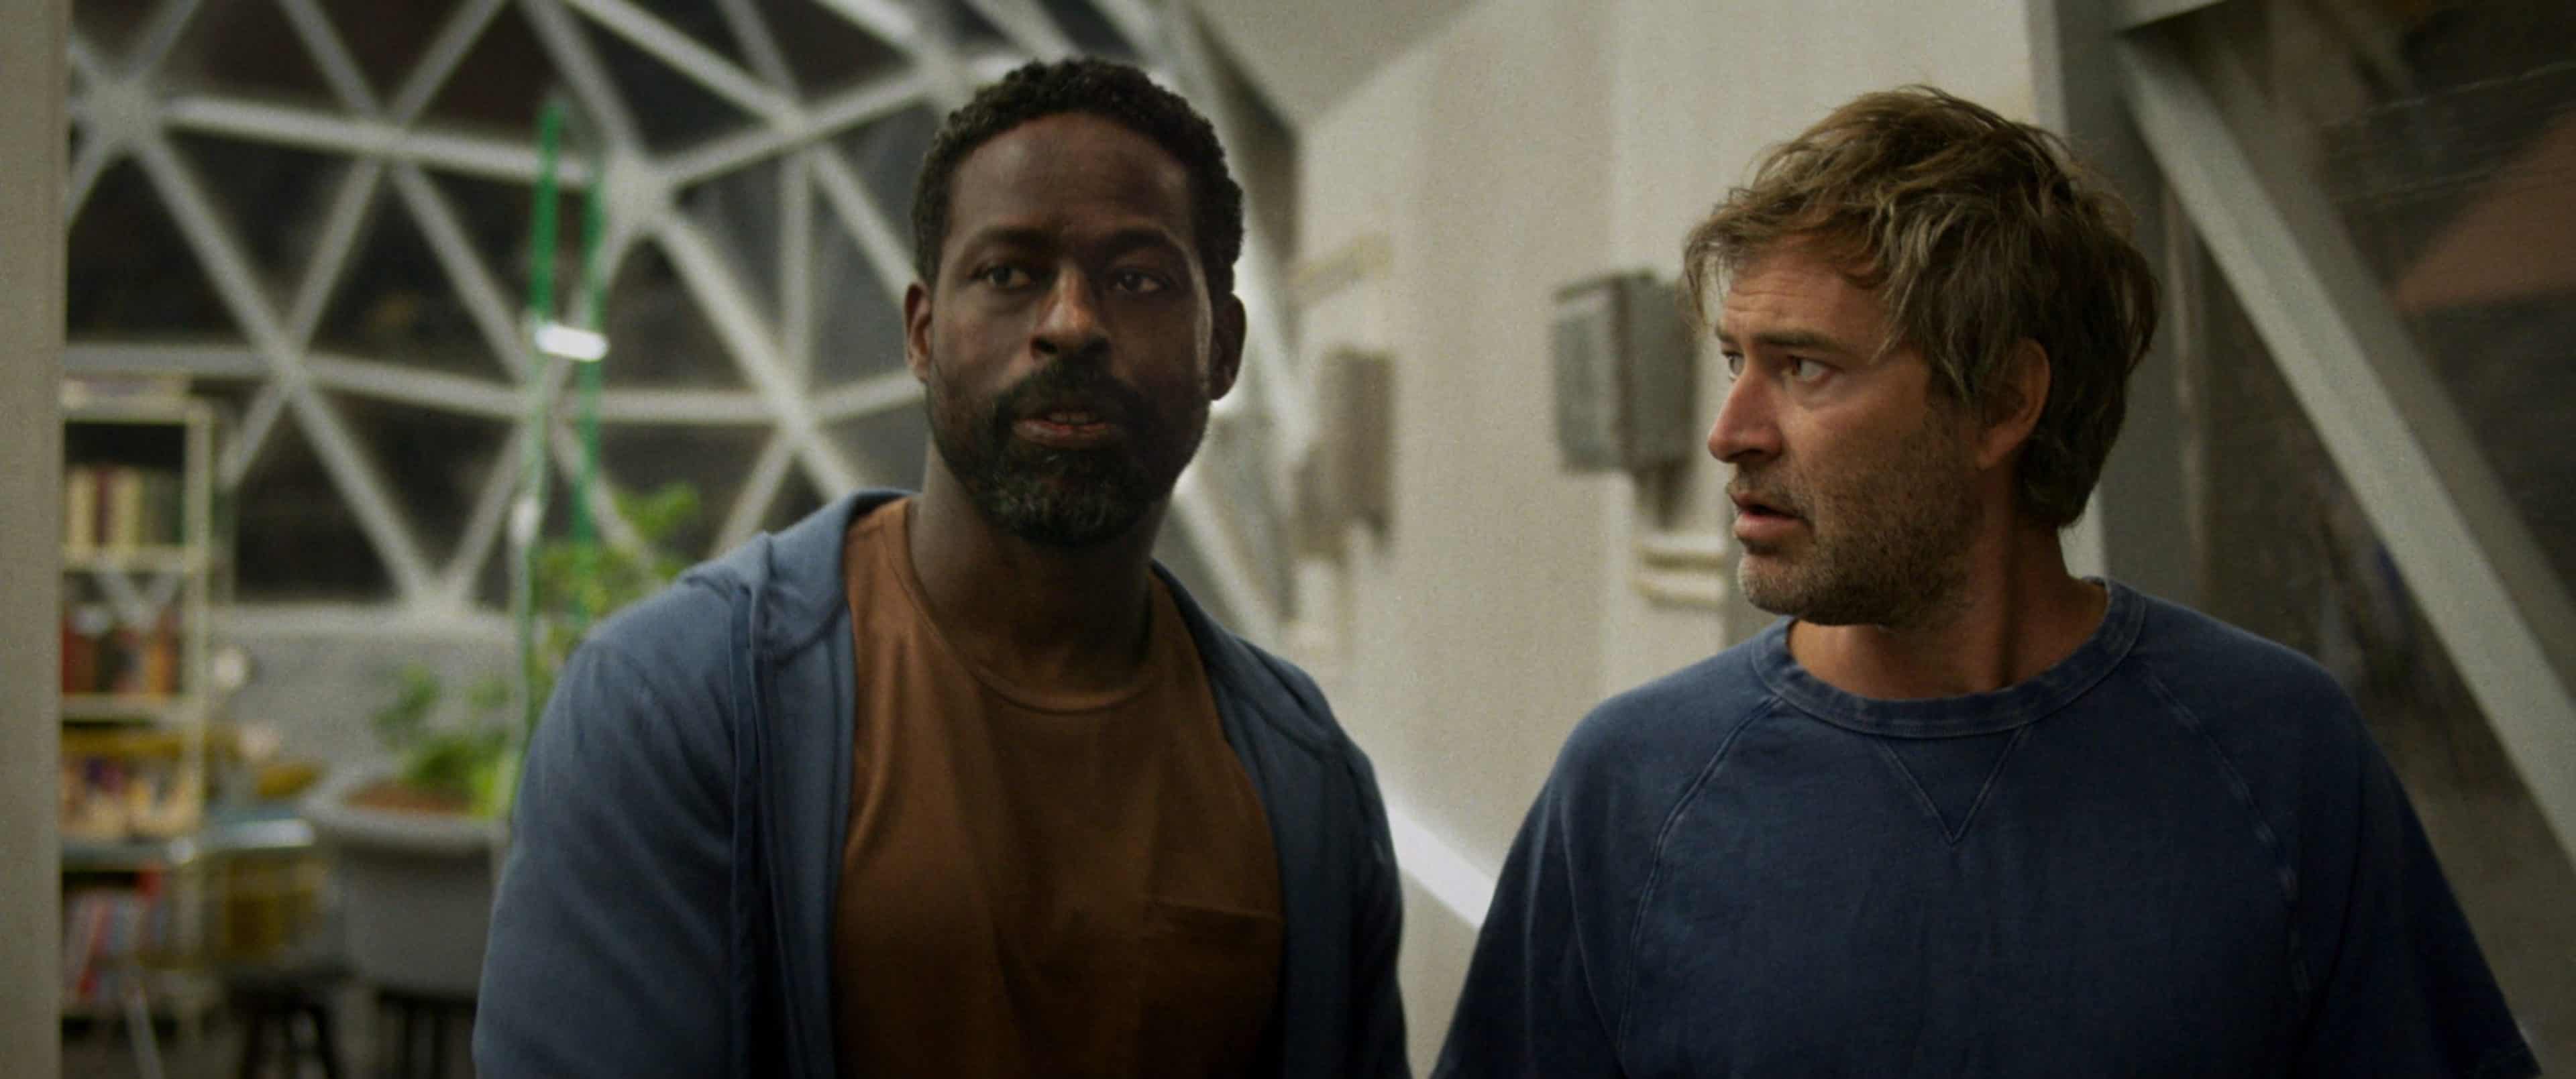 Biosphere has a new trailer from IFC Films 1